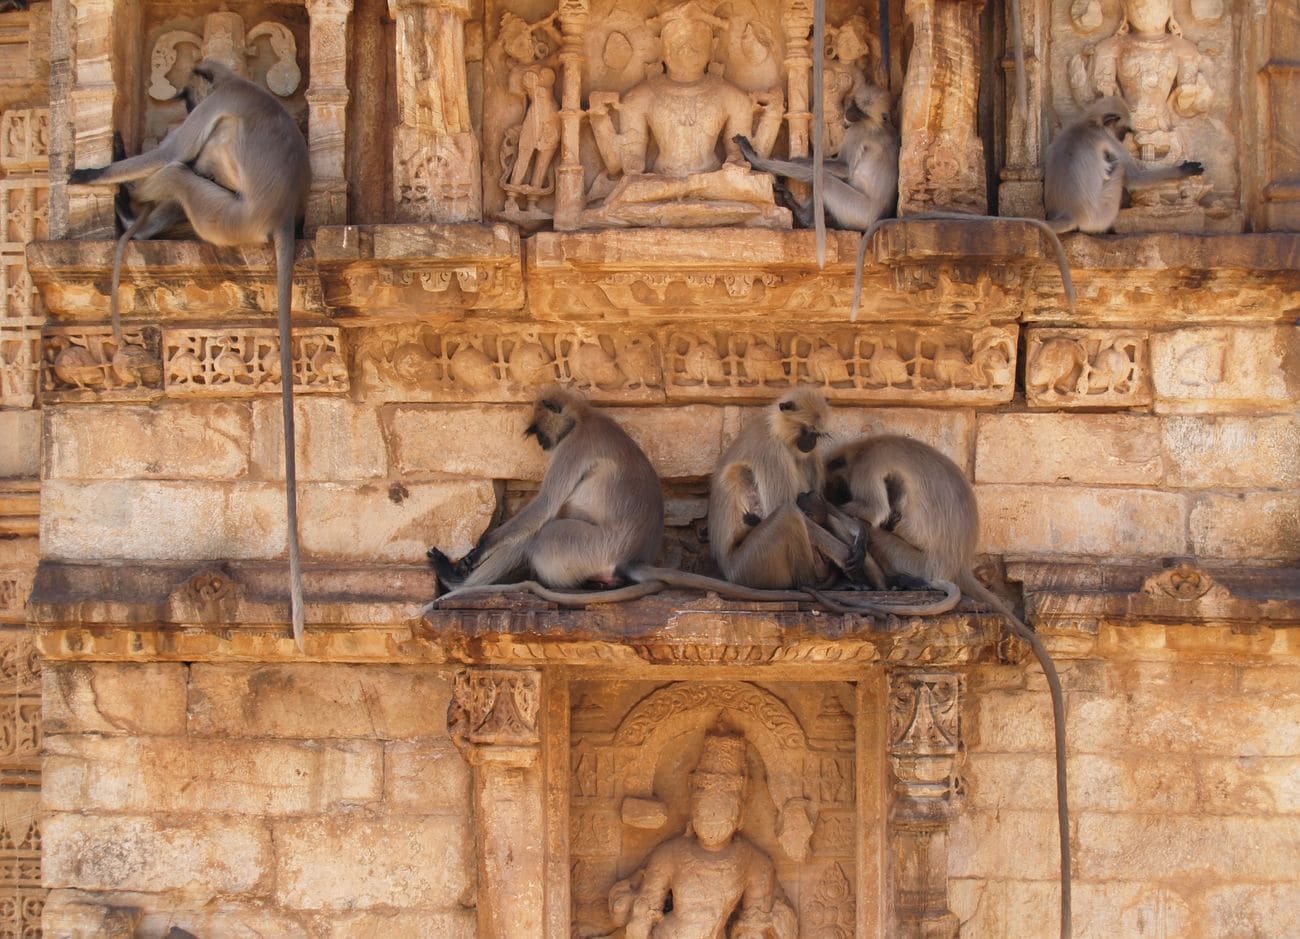 stone carvings of the Chittorgarh Fort